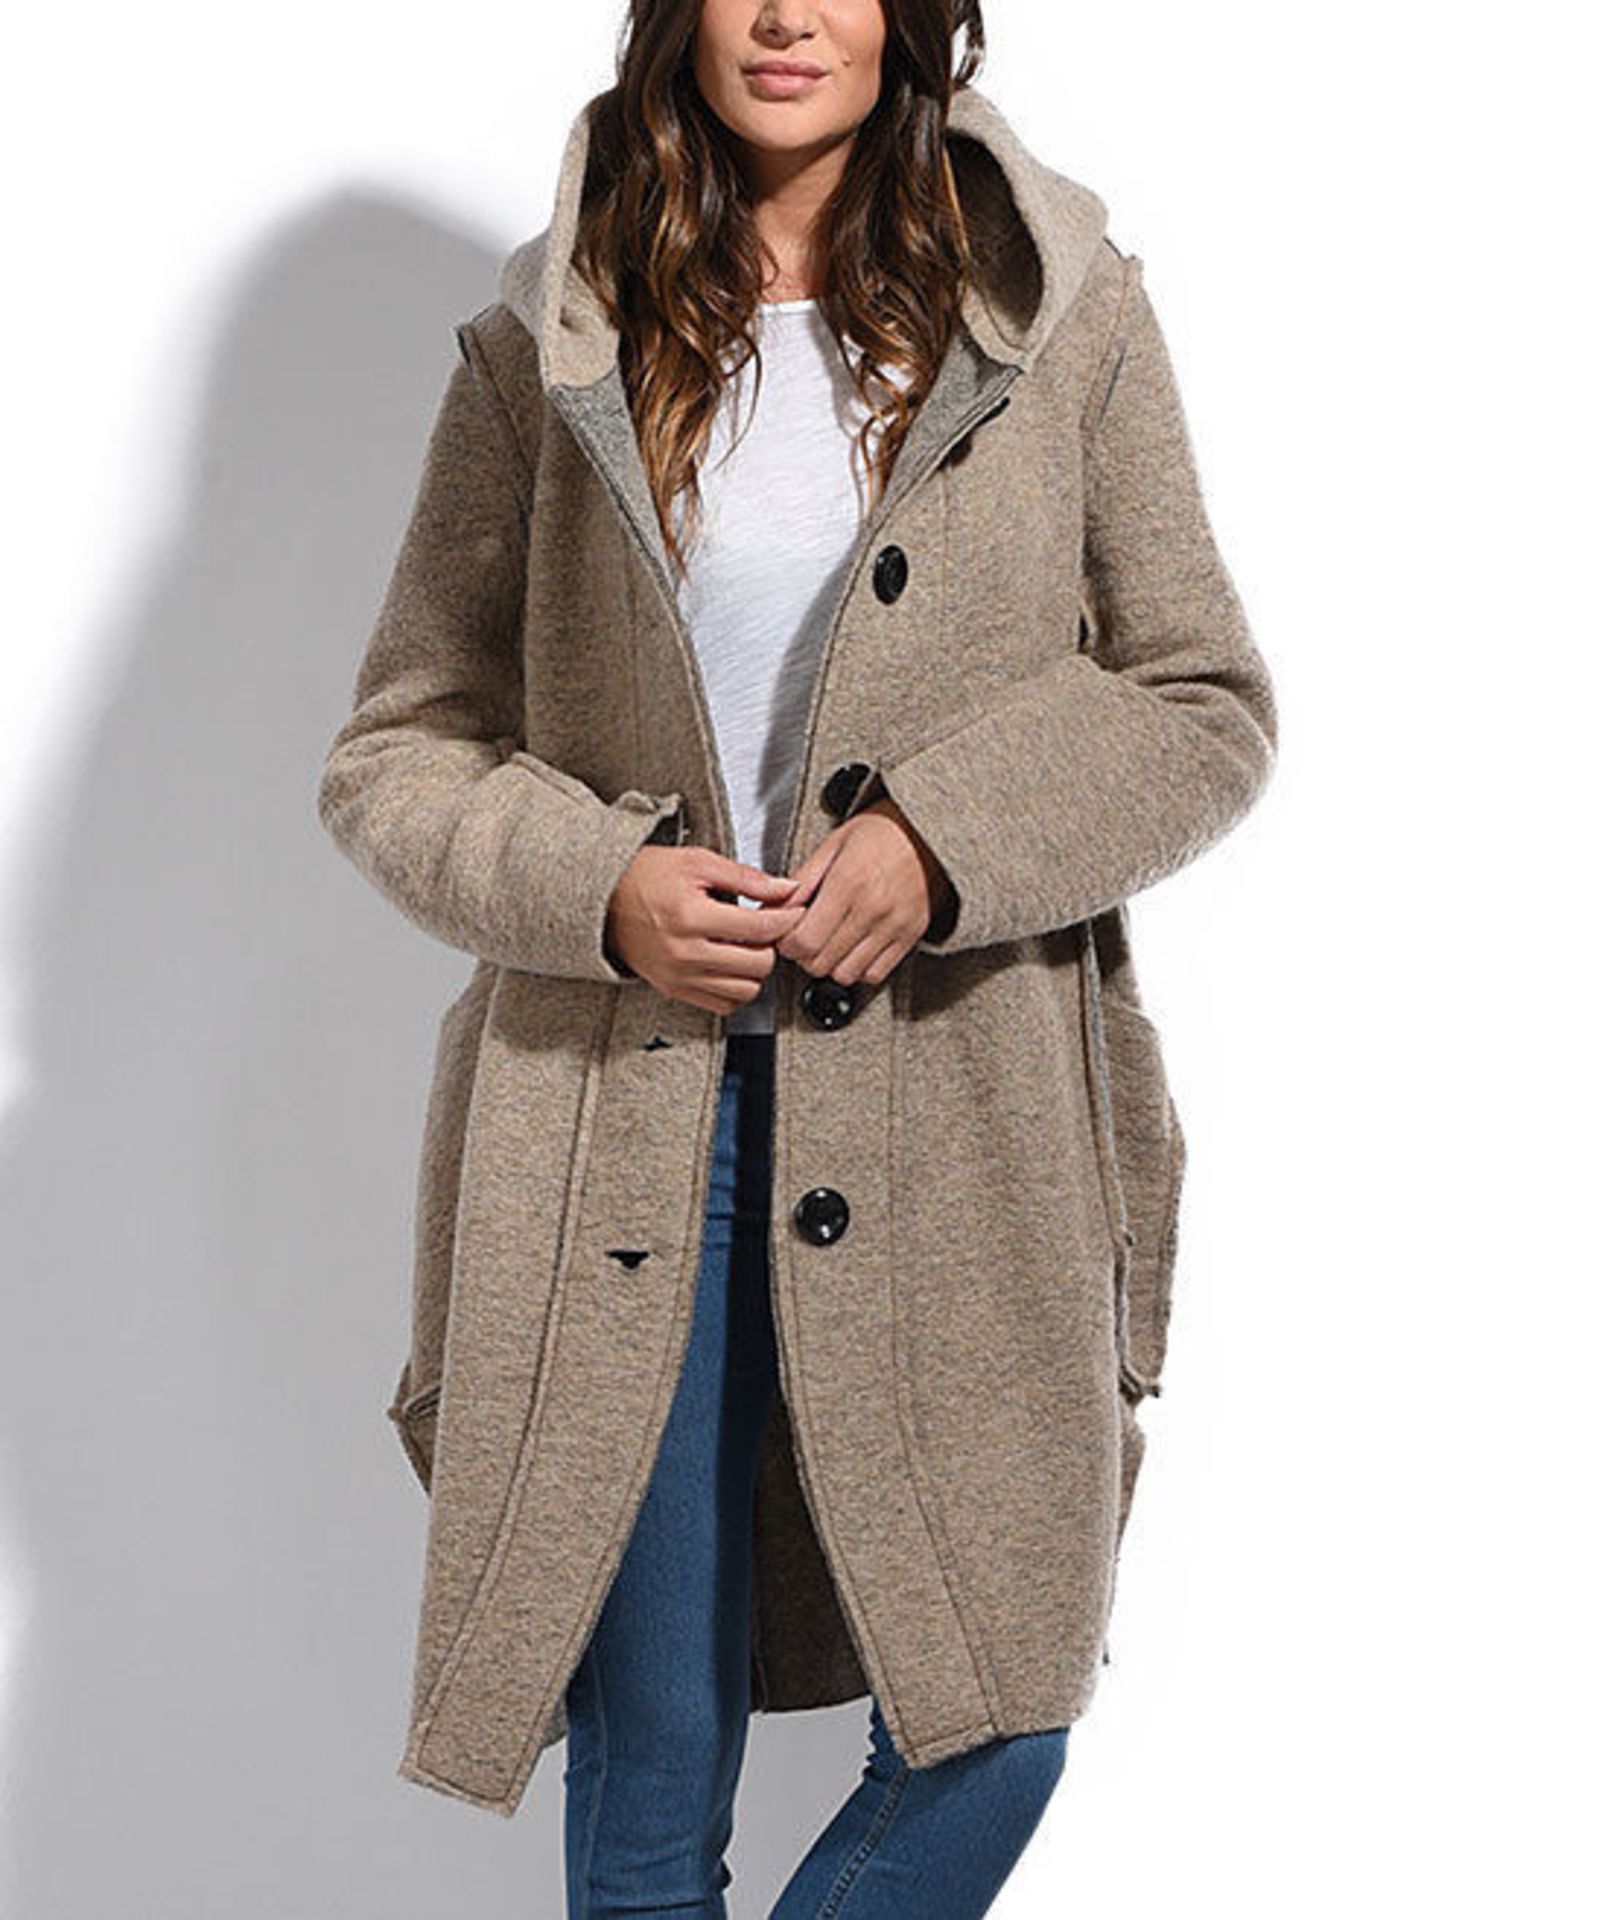 Everest Beige Wool-Blend Coat (Us 10/Uk 14/Eu 42) (New With Tags) [Ref: 42651528--H]